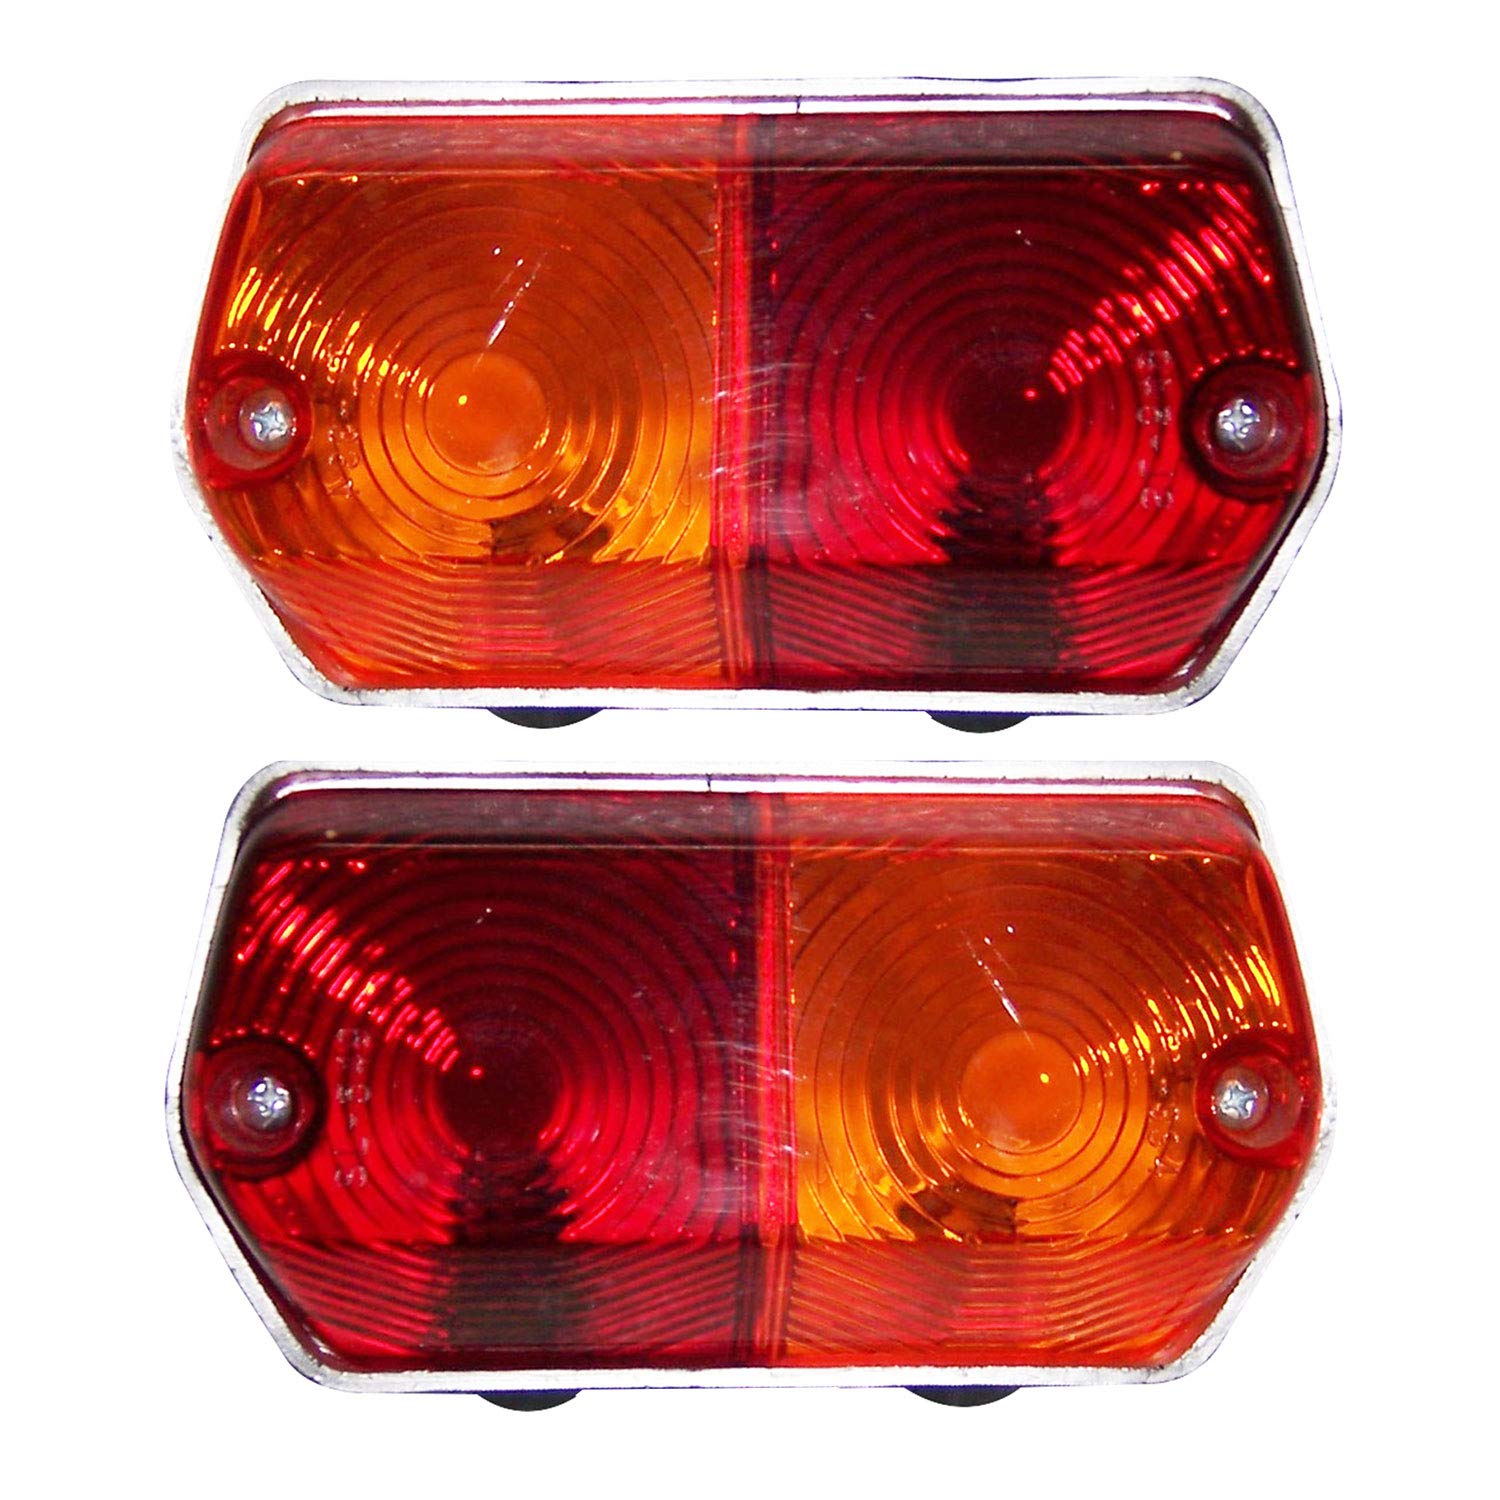 APSMOTIV Bajato Pair of Tractor Tail Light Assembly flasher lamp Rear Tail Light Suitable for Ebro Tractor and Universal Application von Bajato